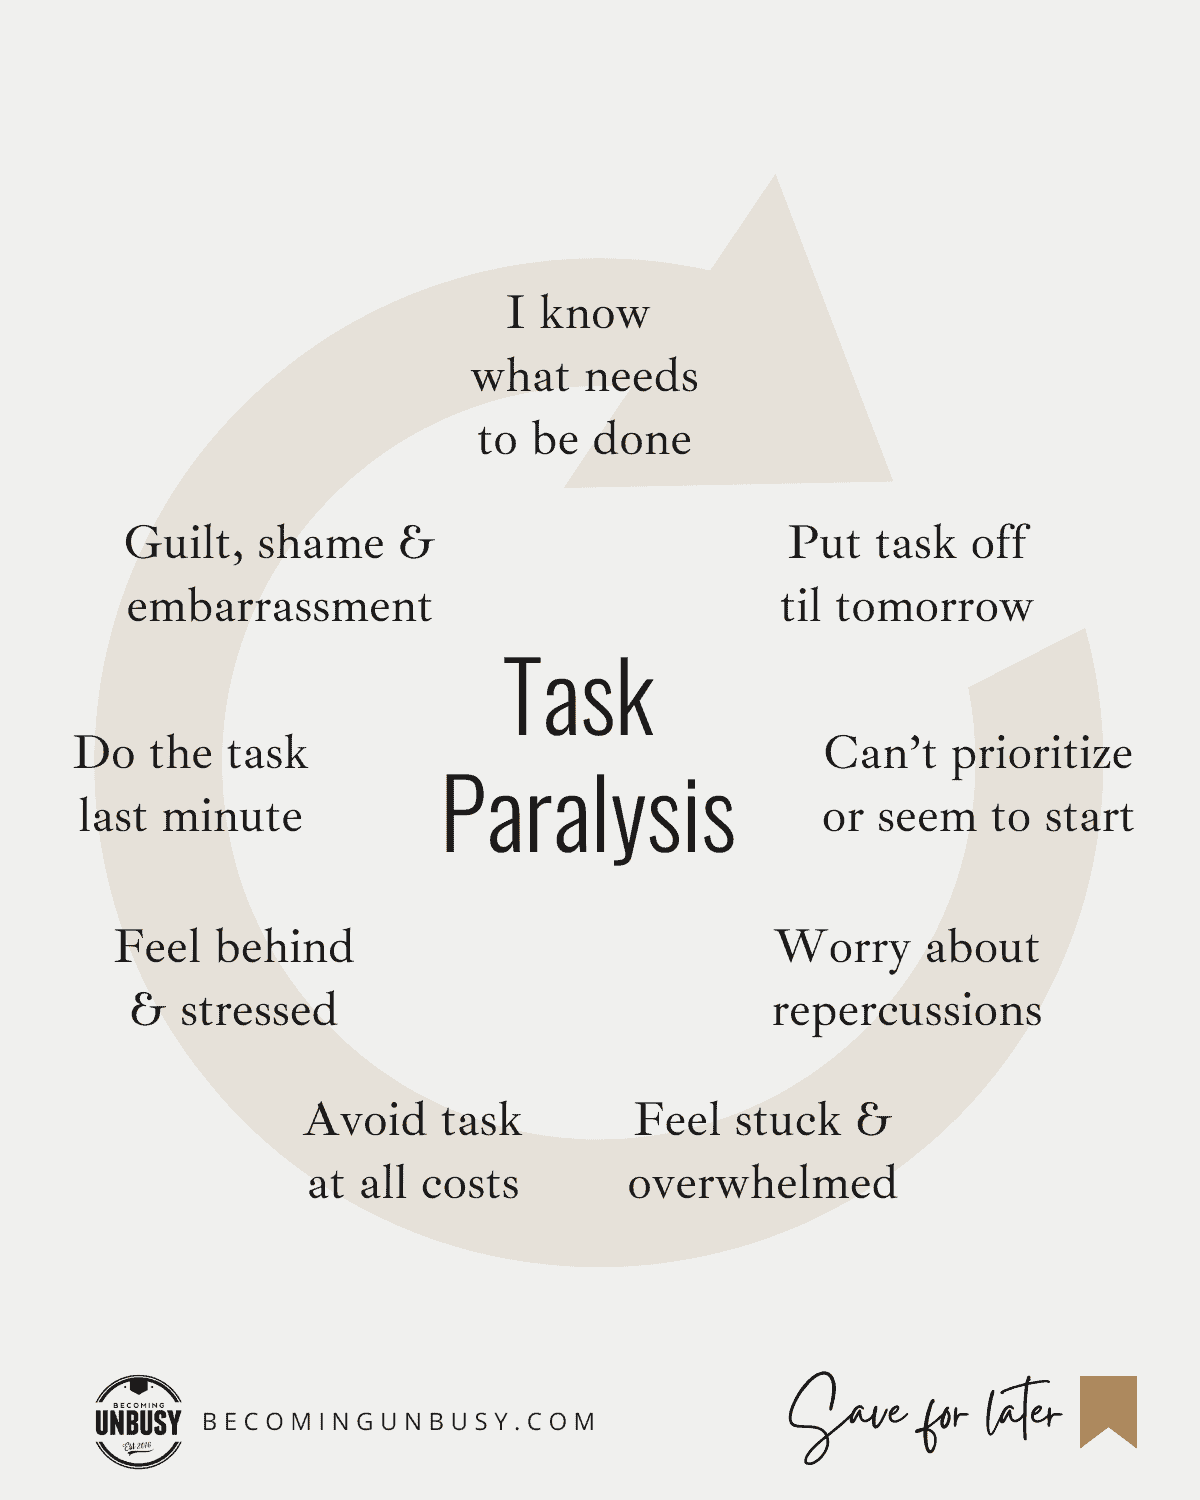 A graphic showcasing the frustration of task paralysis, moving from stages including: I know what needs to be done, put task of til tomorrow, can't prioritize or start, avoid task, do it last minute, and then feel guilt and shame.